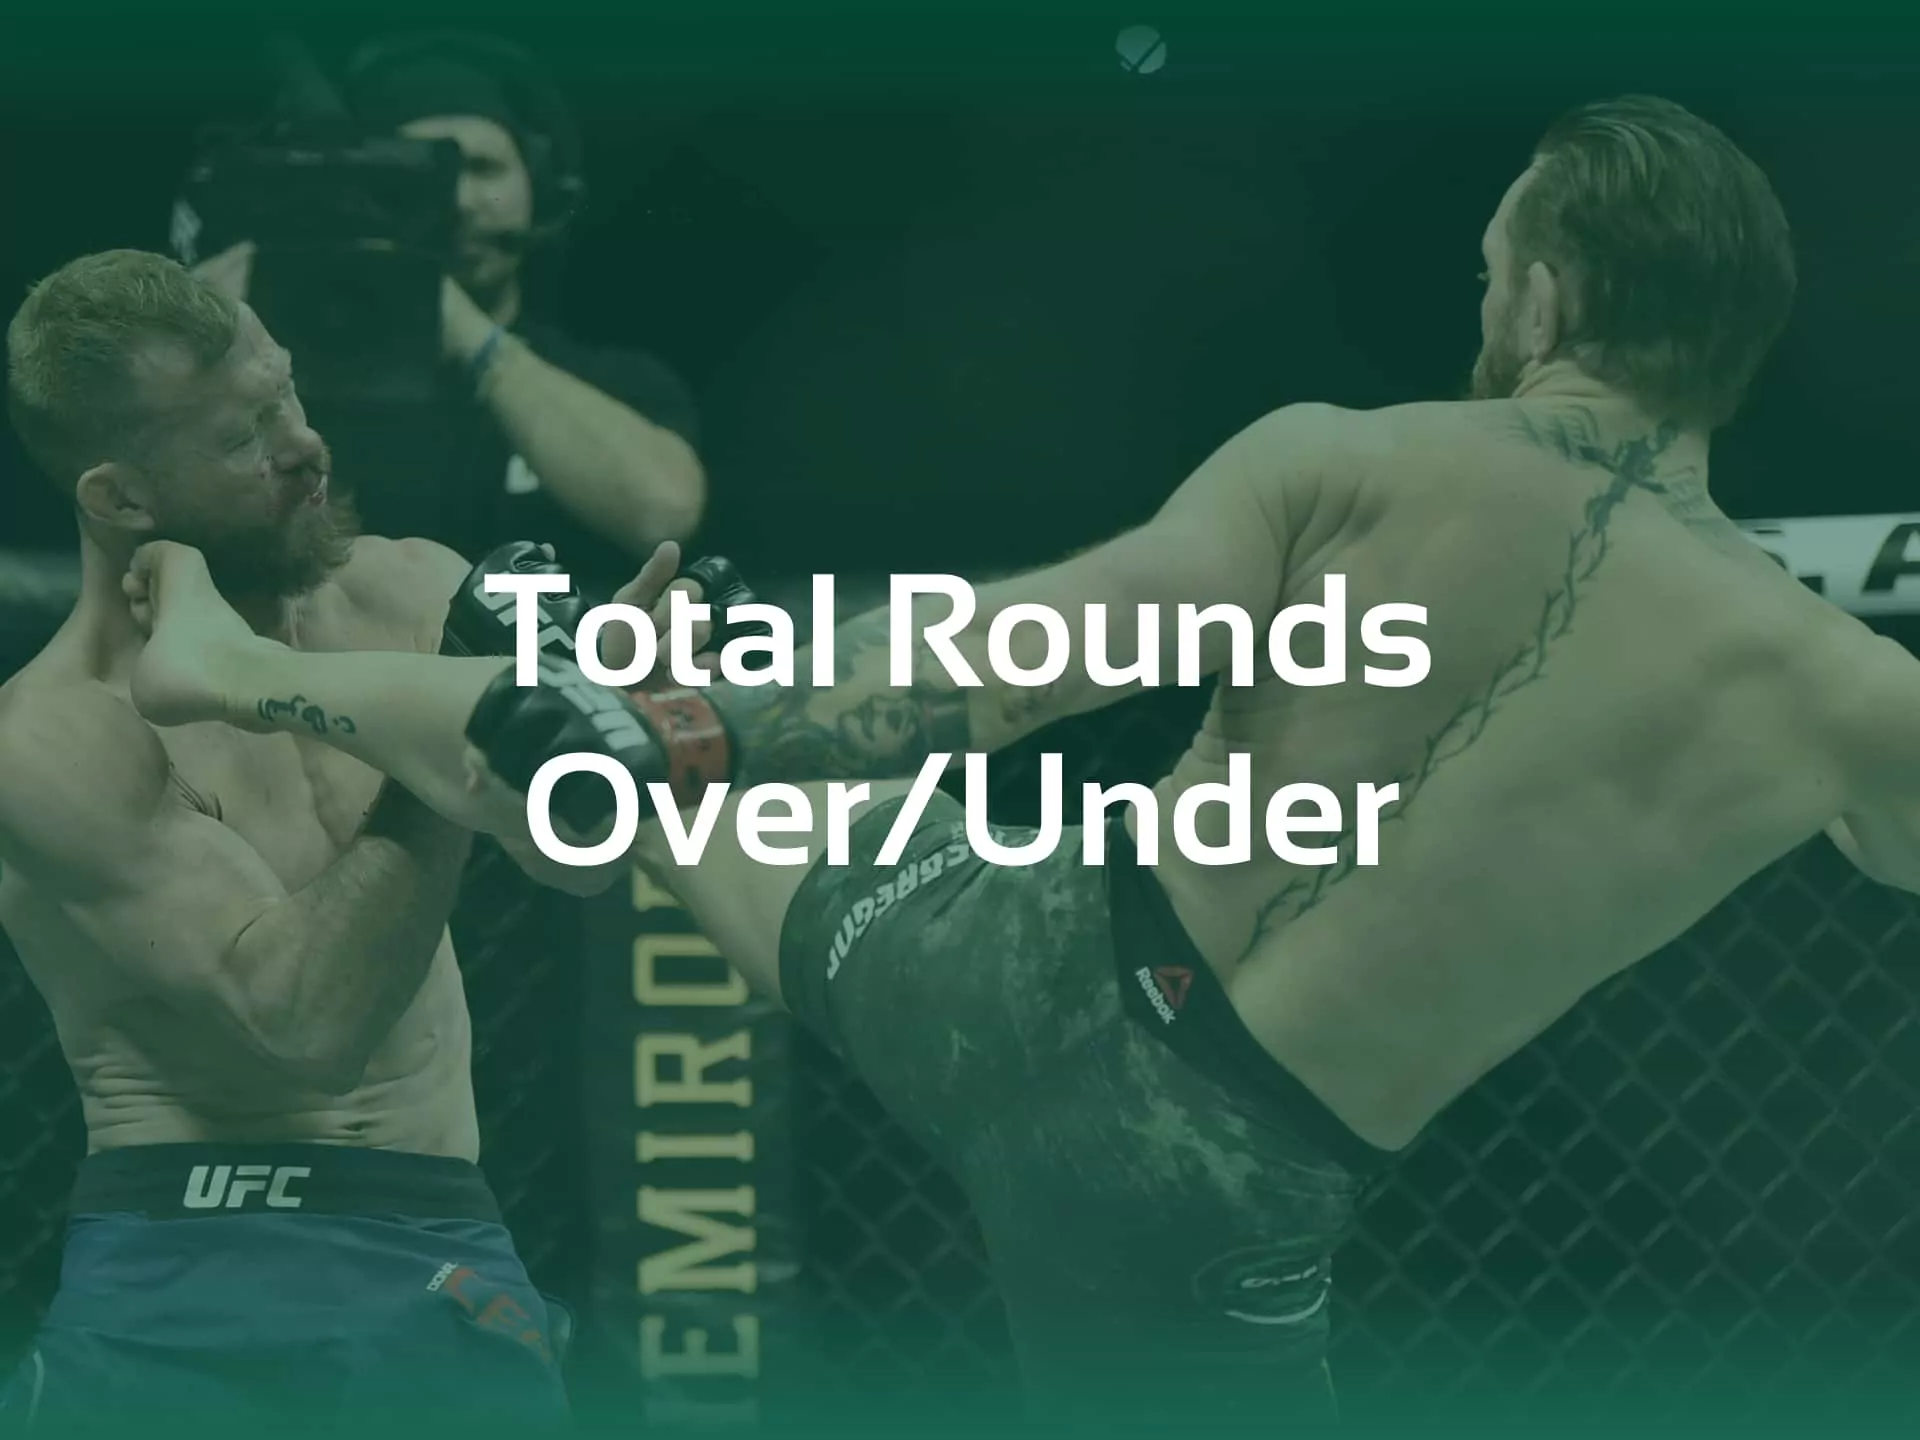 Total Rounds Over/Under bet type on UFC betting sites.